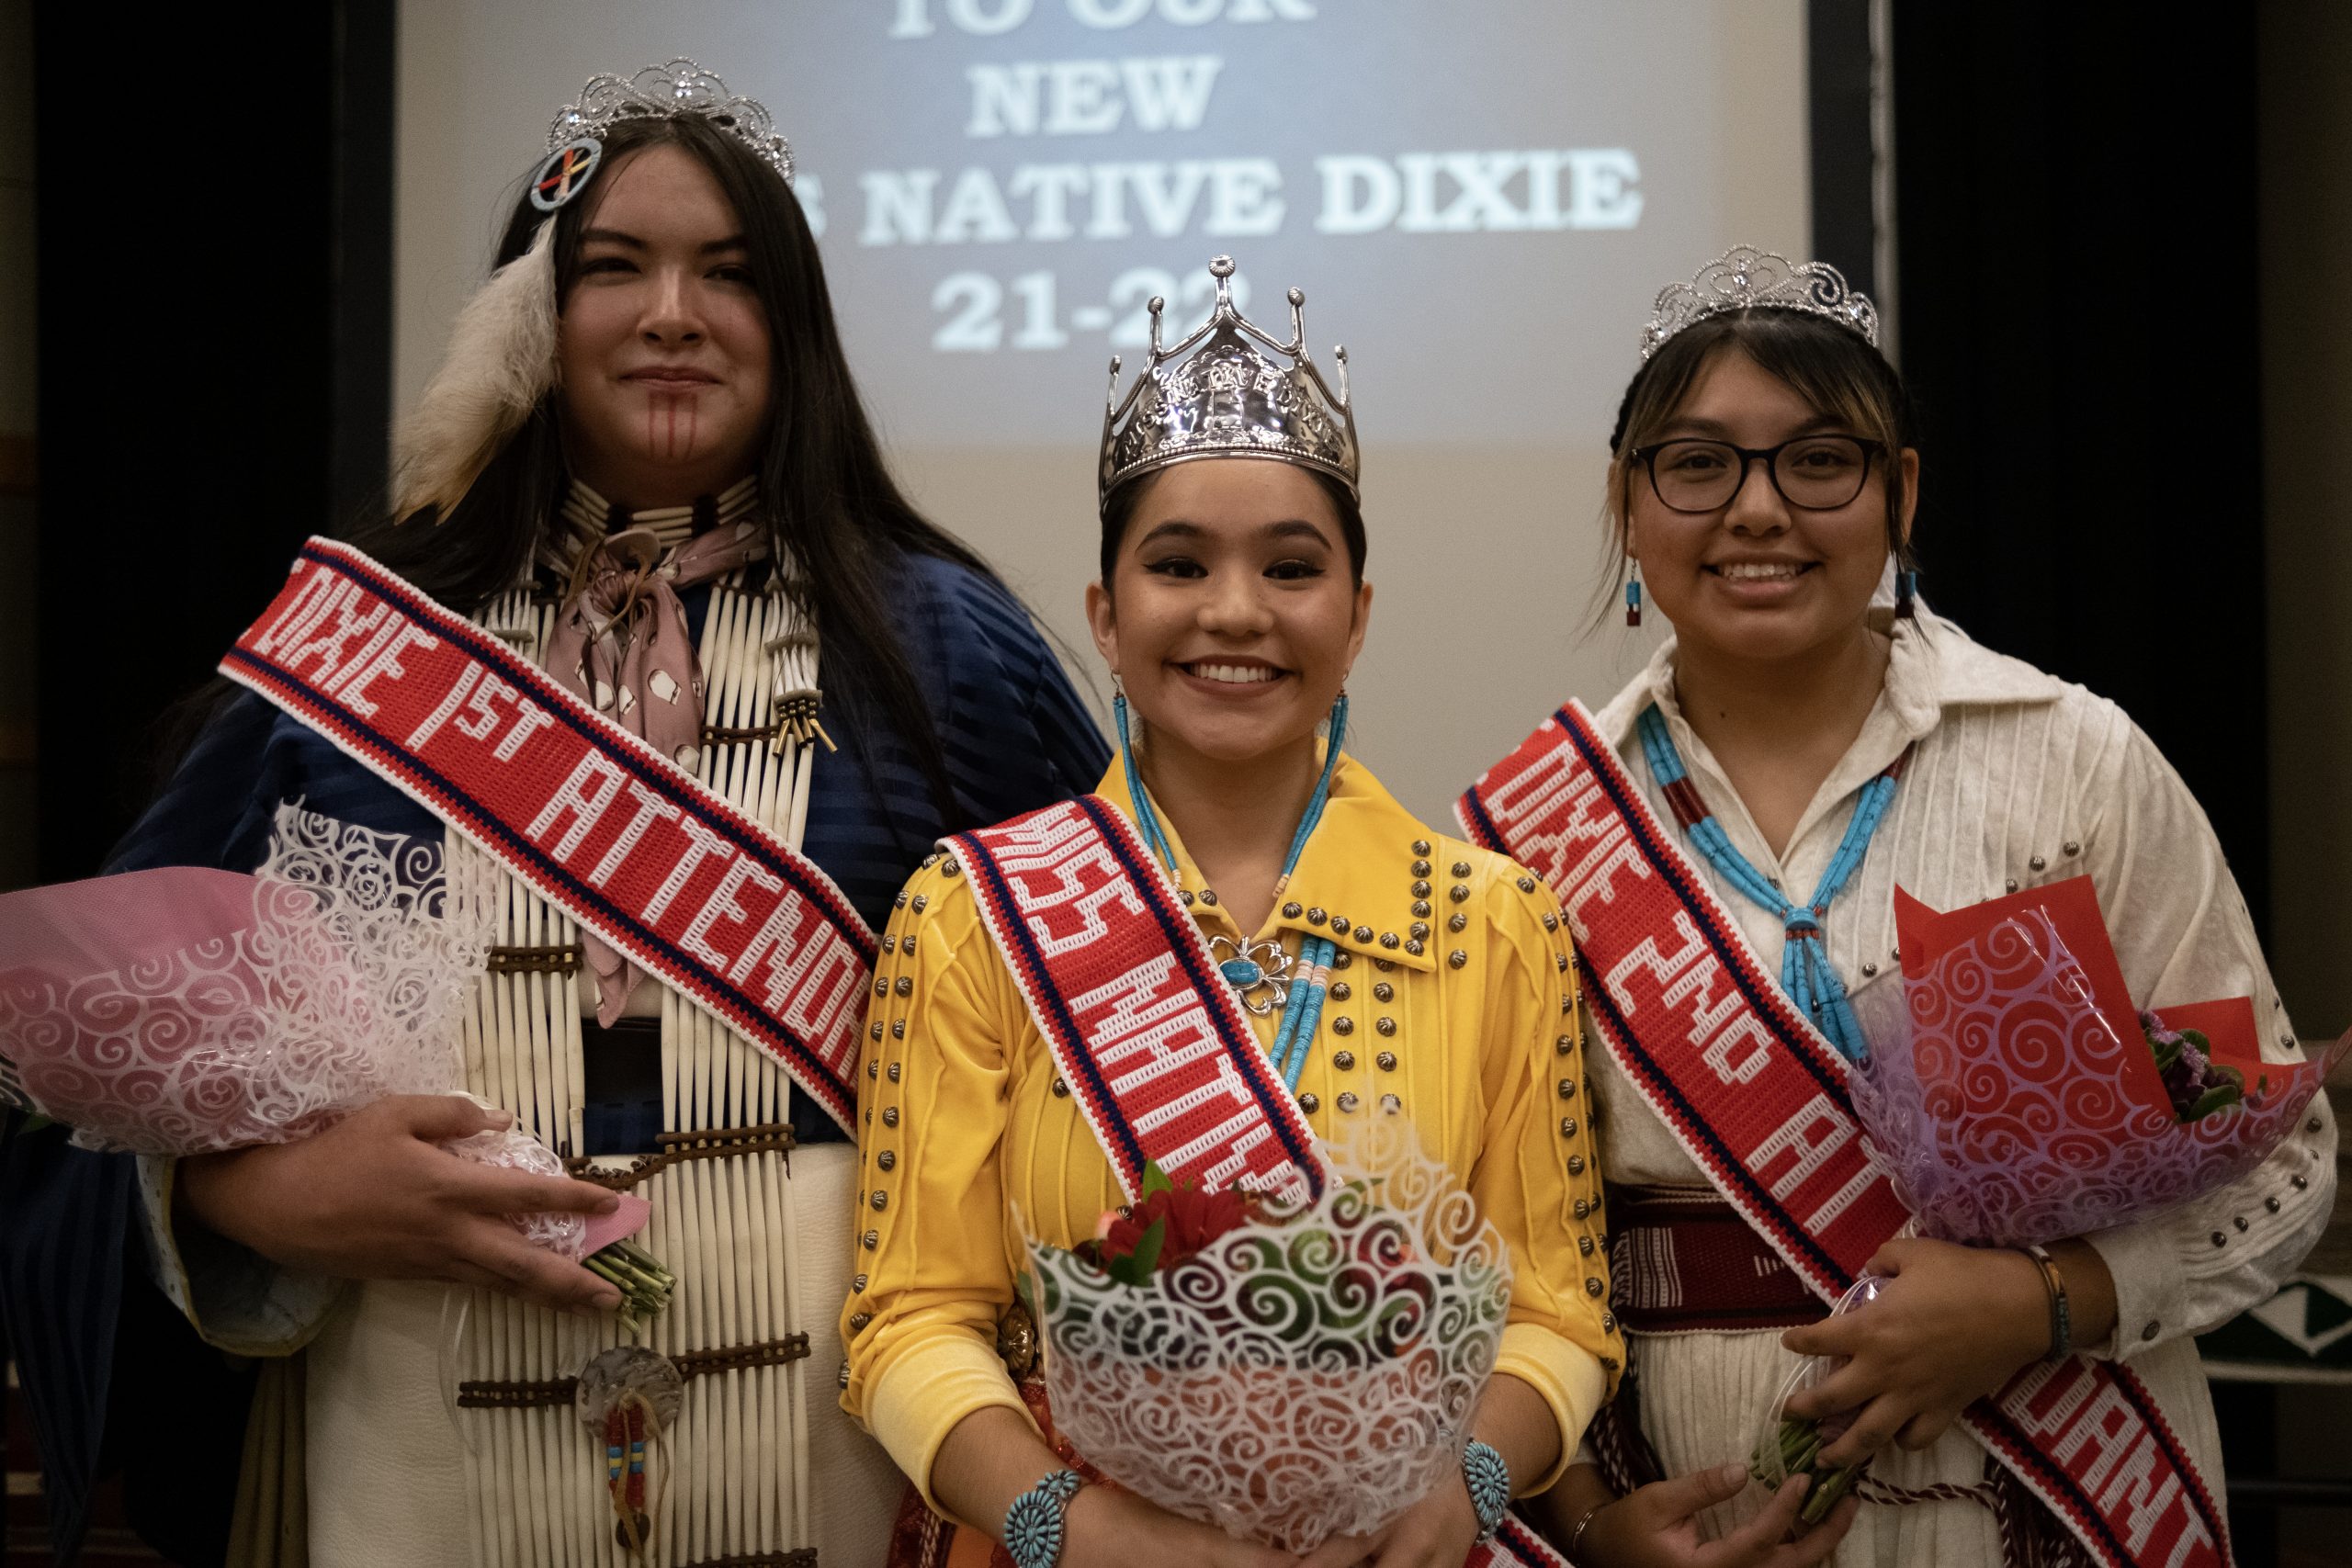 Welcoming the new Miss Native Dixie State University